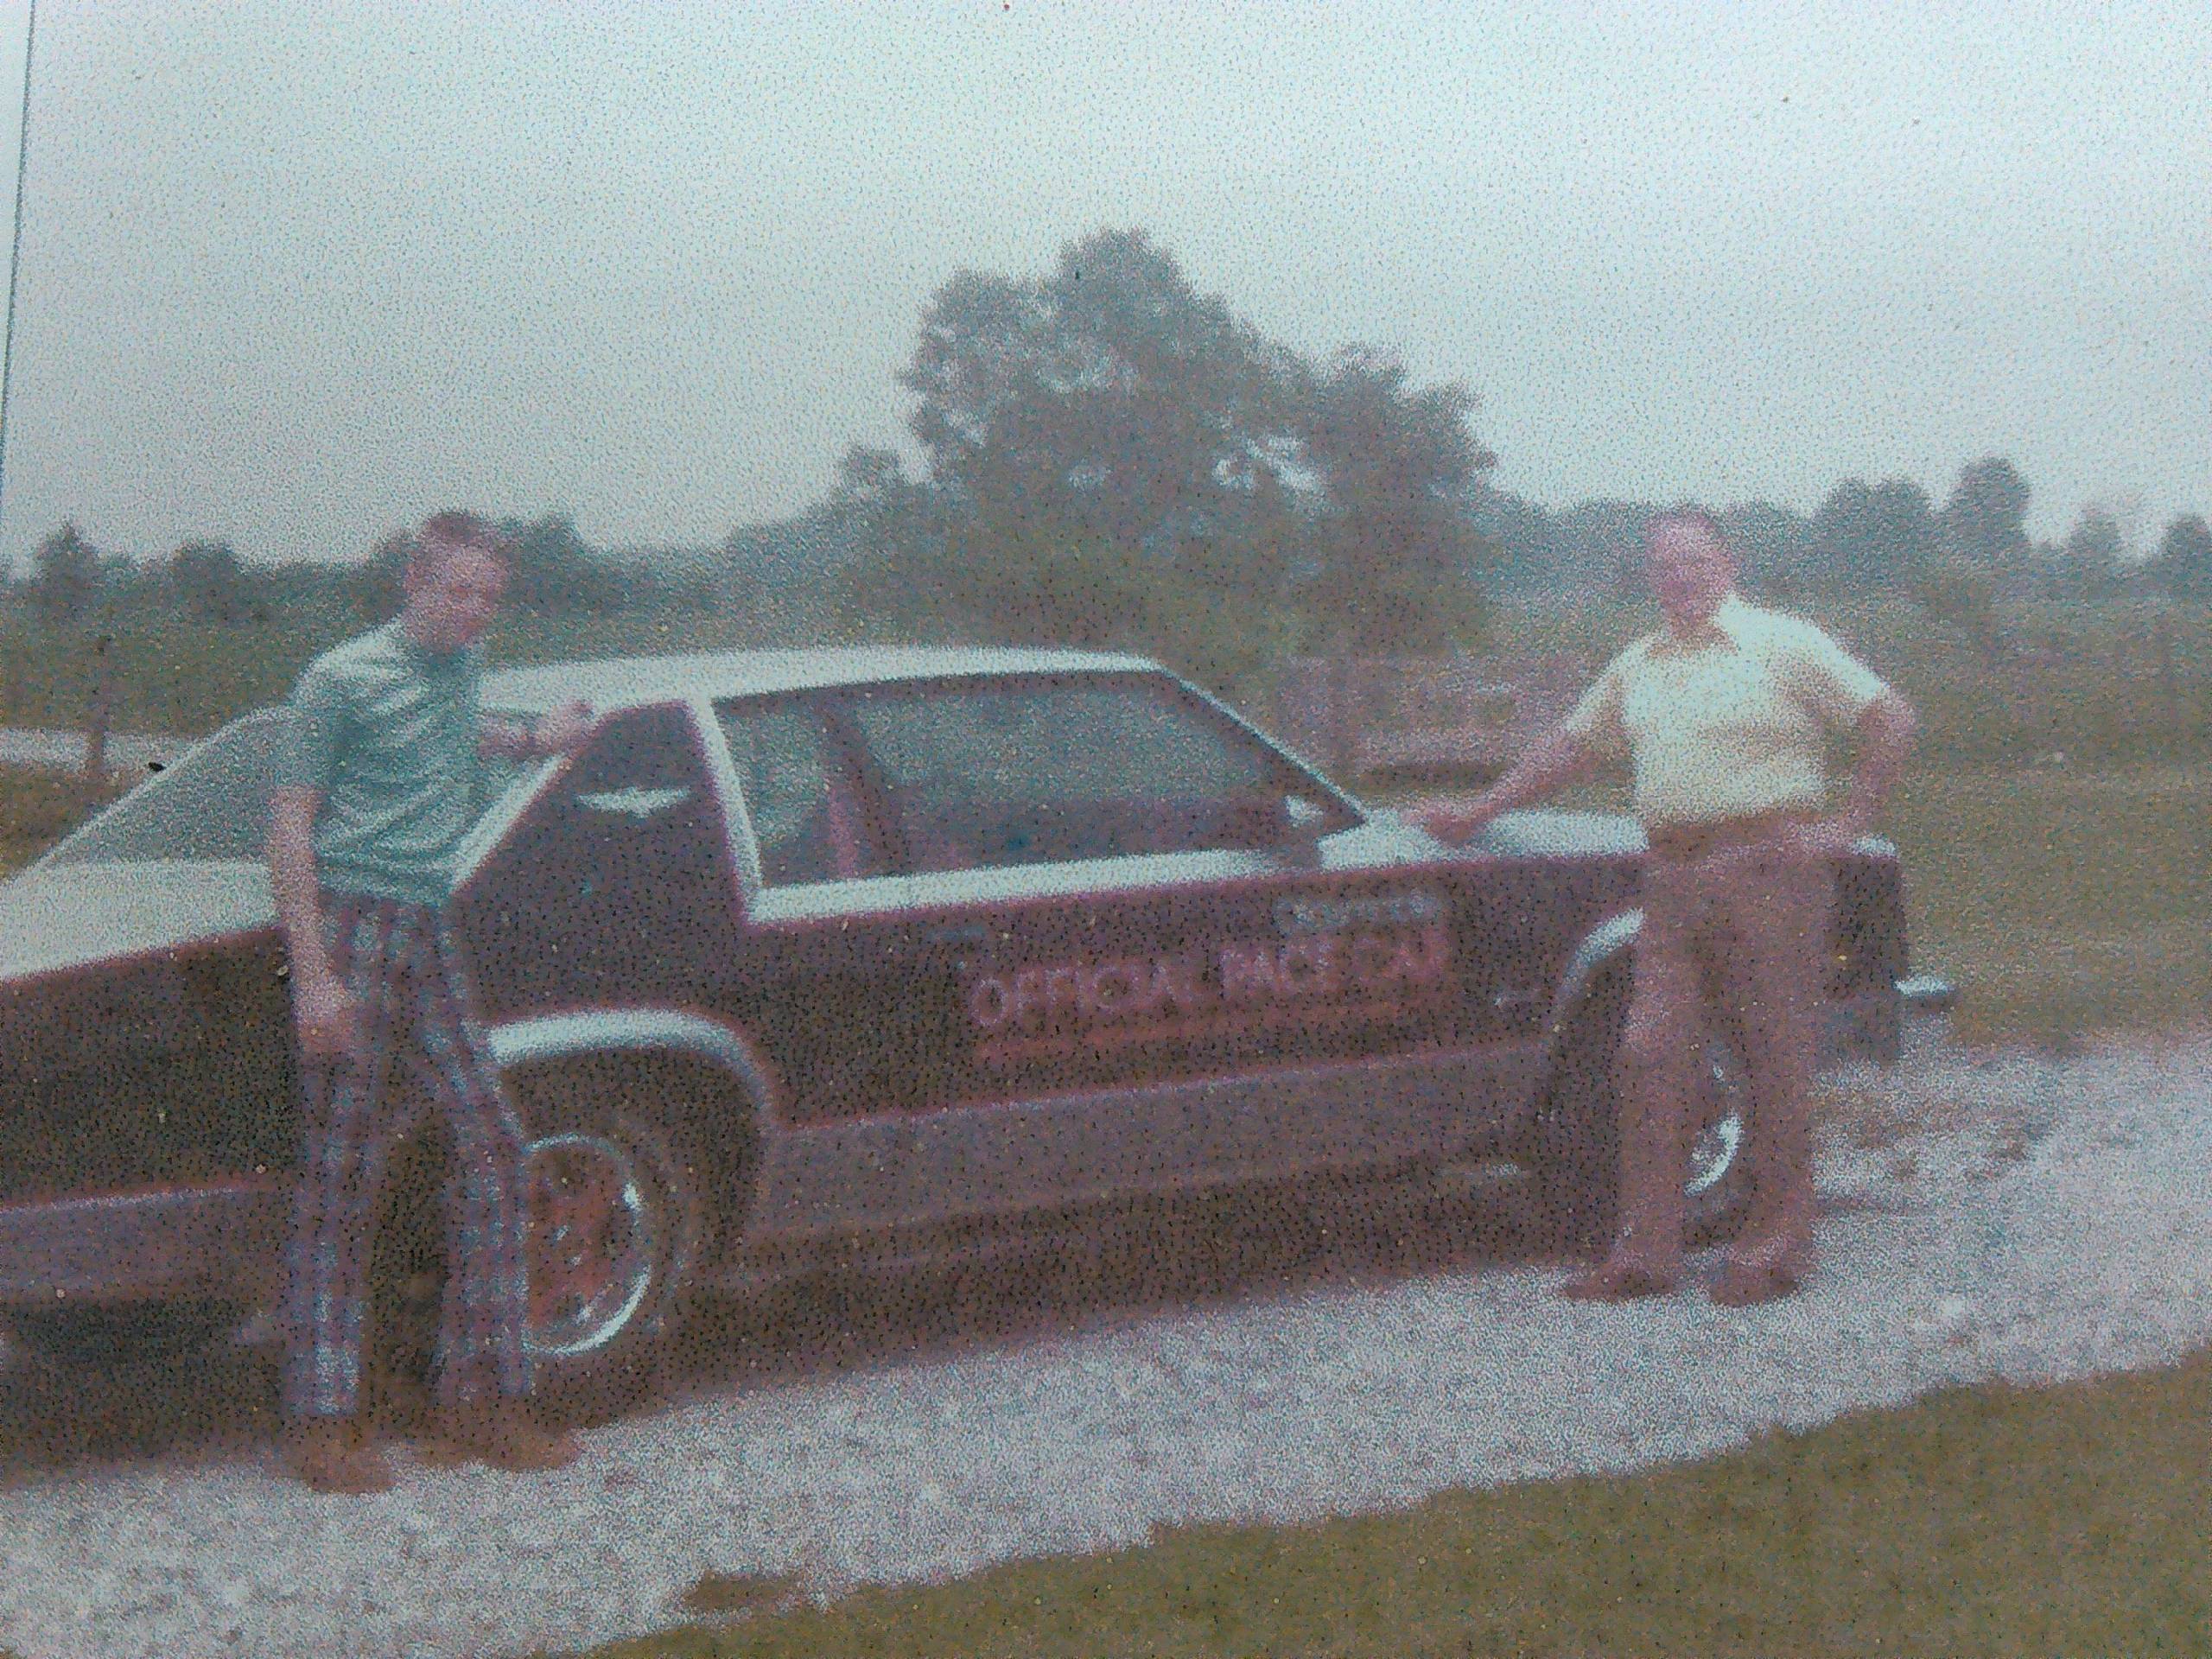 My father &amp; me with his brand new 1977 delta 88 Indy pace car replica,one of 2401 made.I was 14